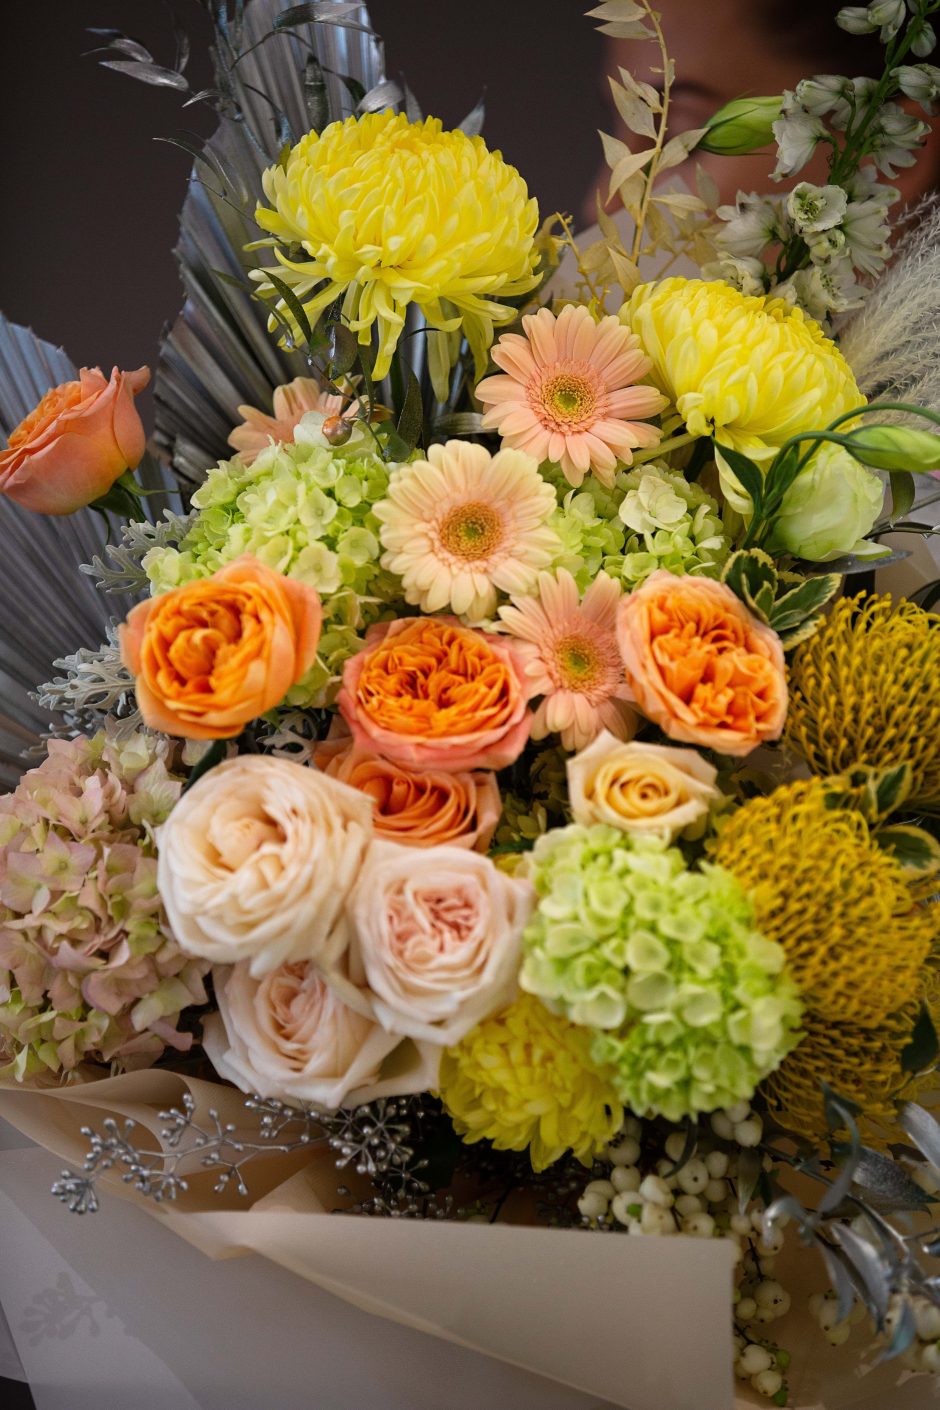 Sunrise Meadow - Garden roses topped off with eye candy flowers - Maison la Fleur